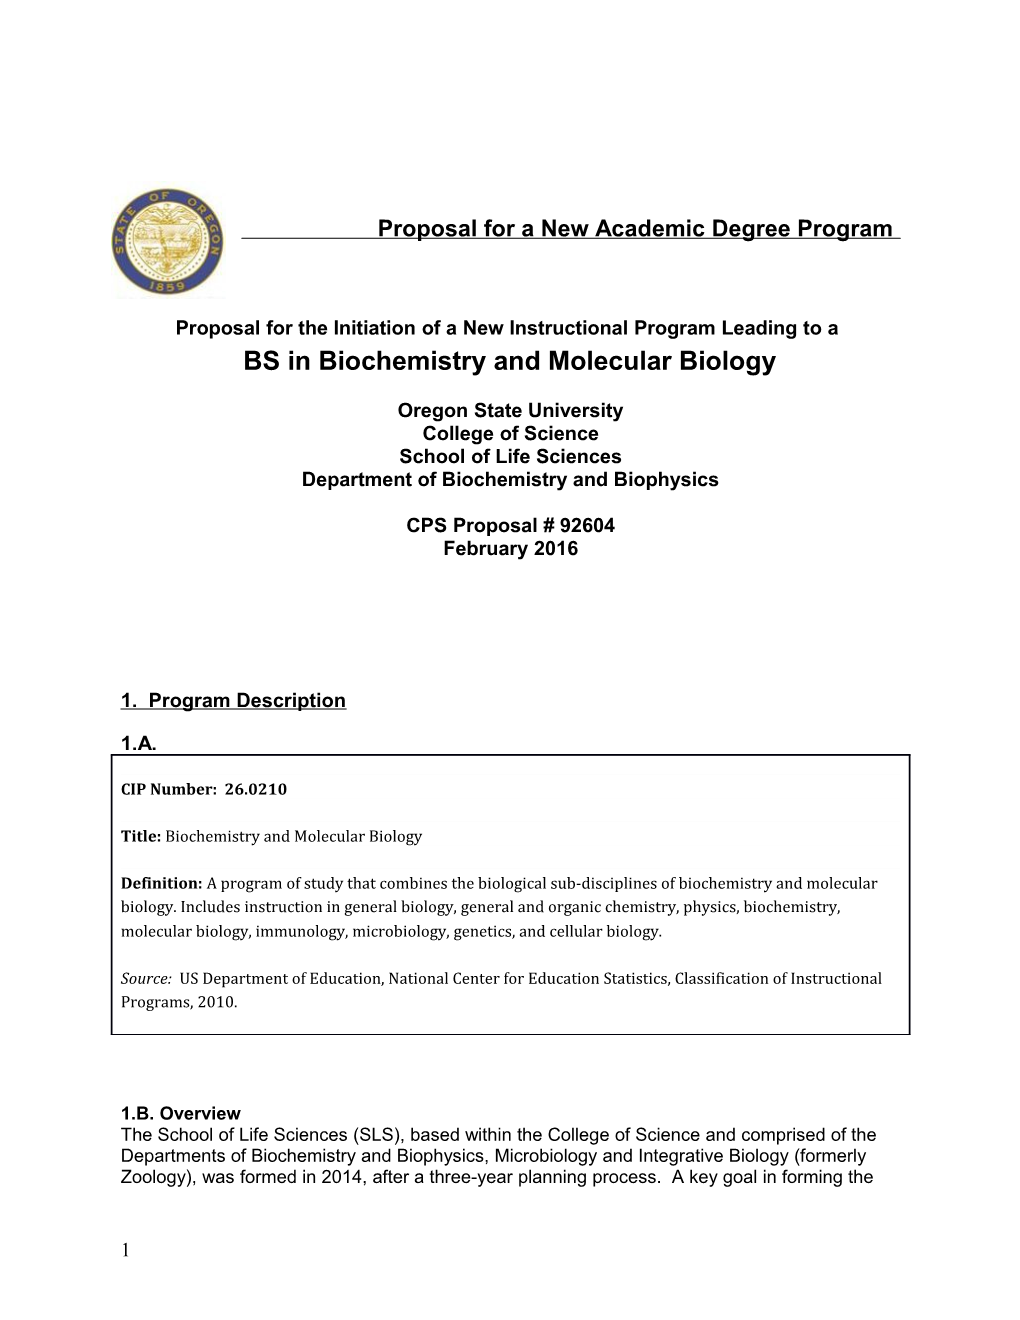 Proposal for a New Academic Degree Program